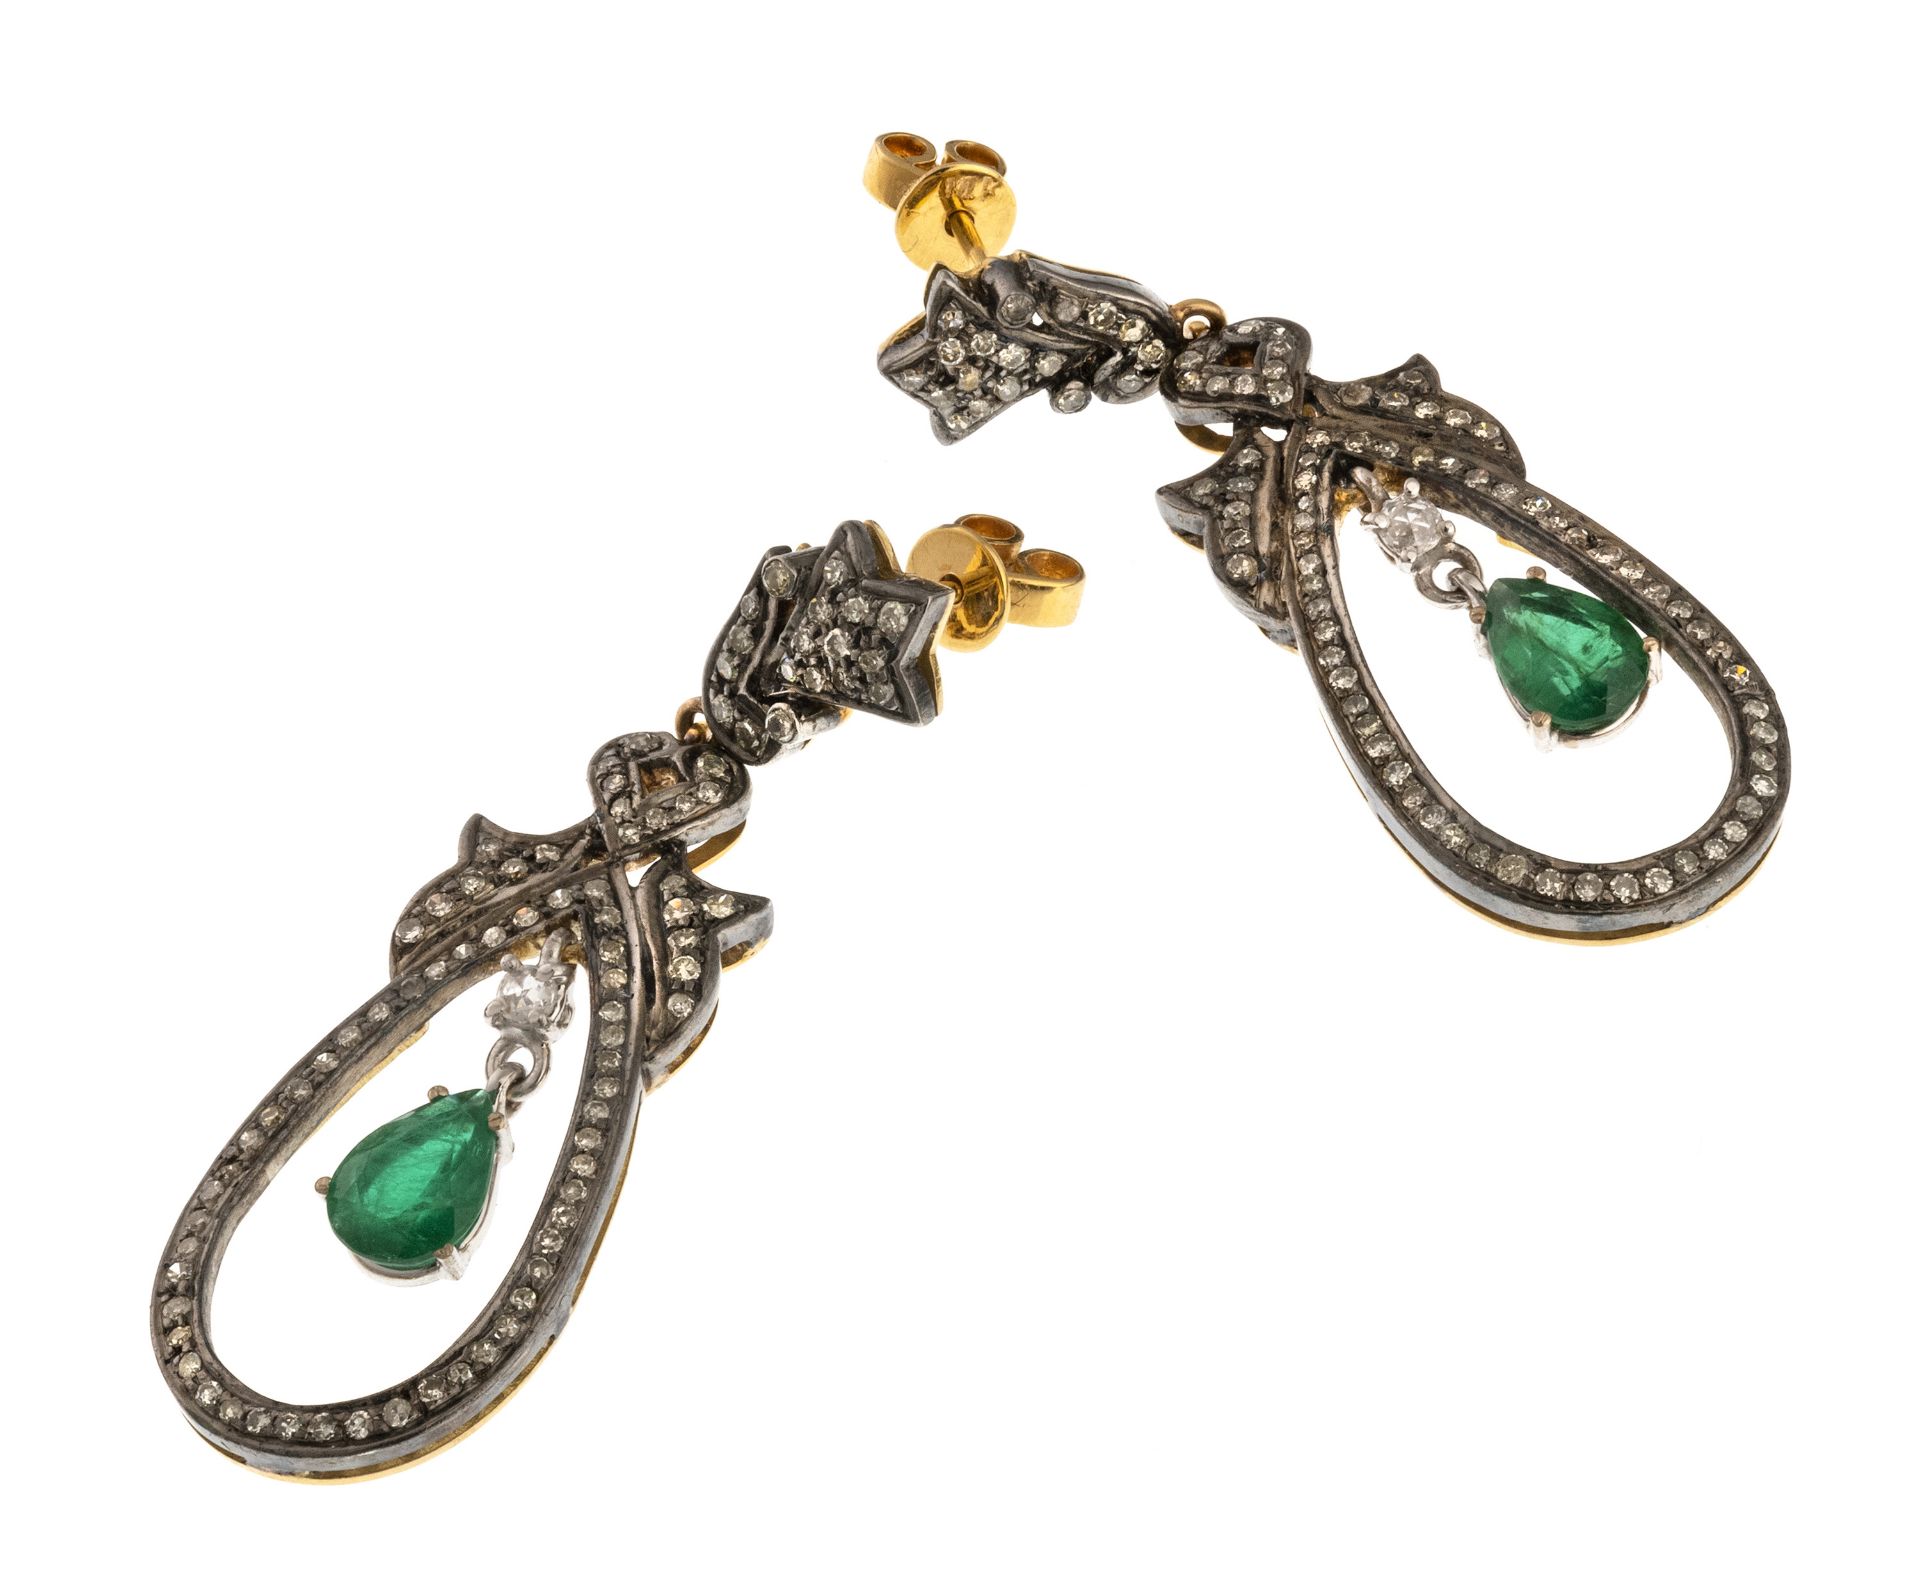 GOLD AND SILVER EARRINGS WITH DIAMONDS AND EMERALDS